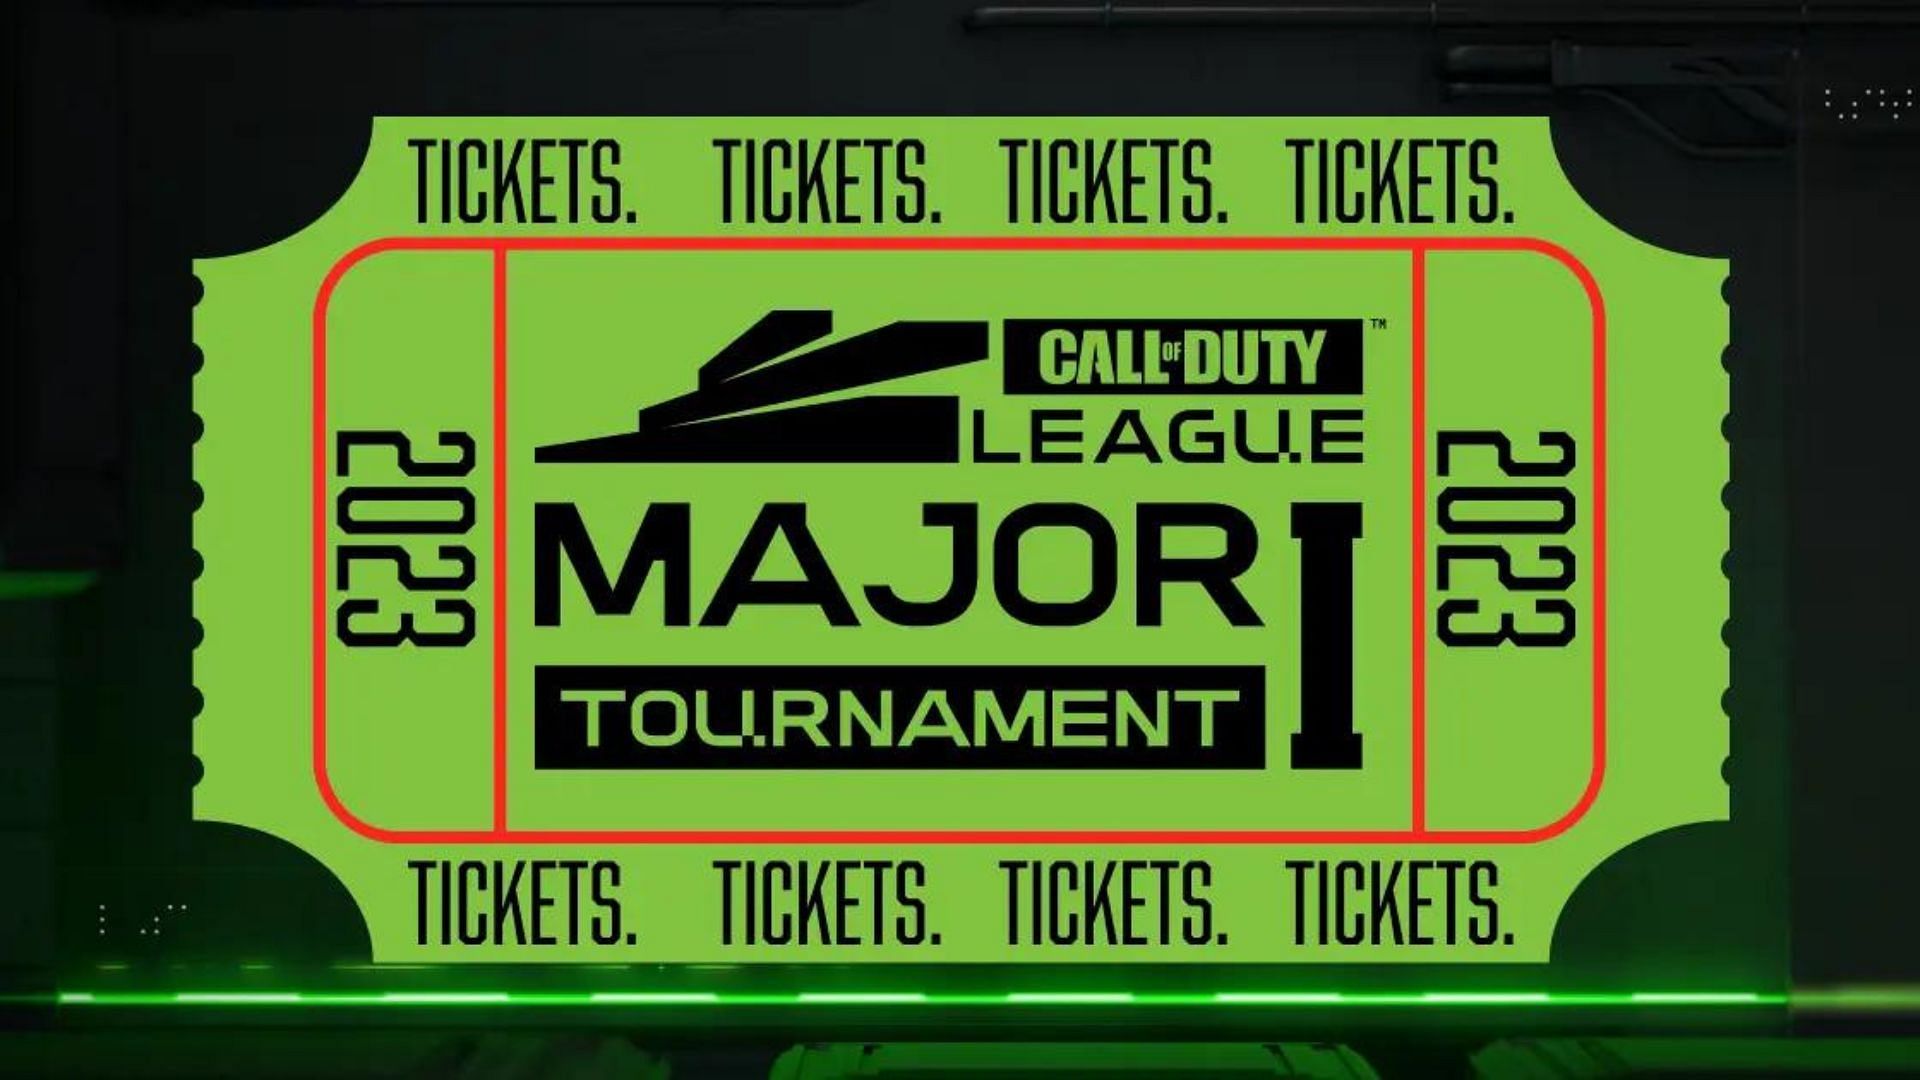 How to buy tickets for Call of Duty League 2023 Major I tournament? Price, venue, and more